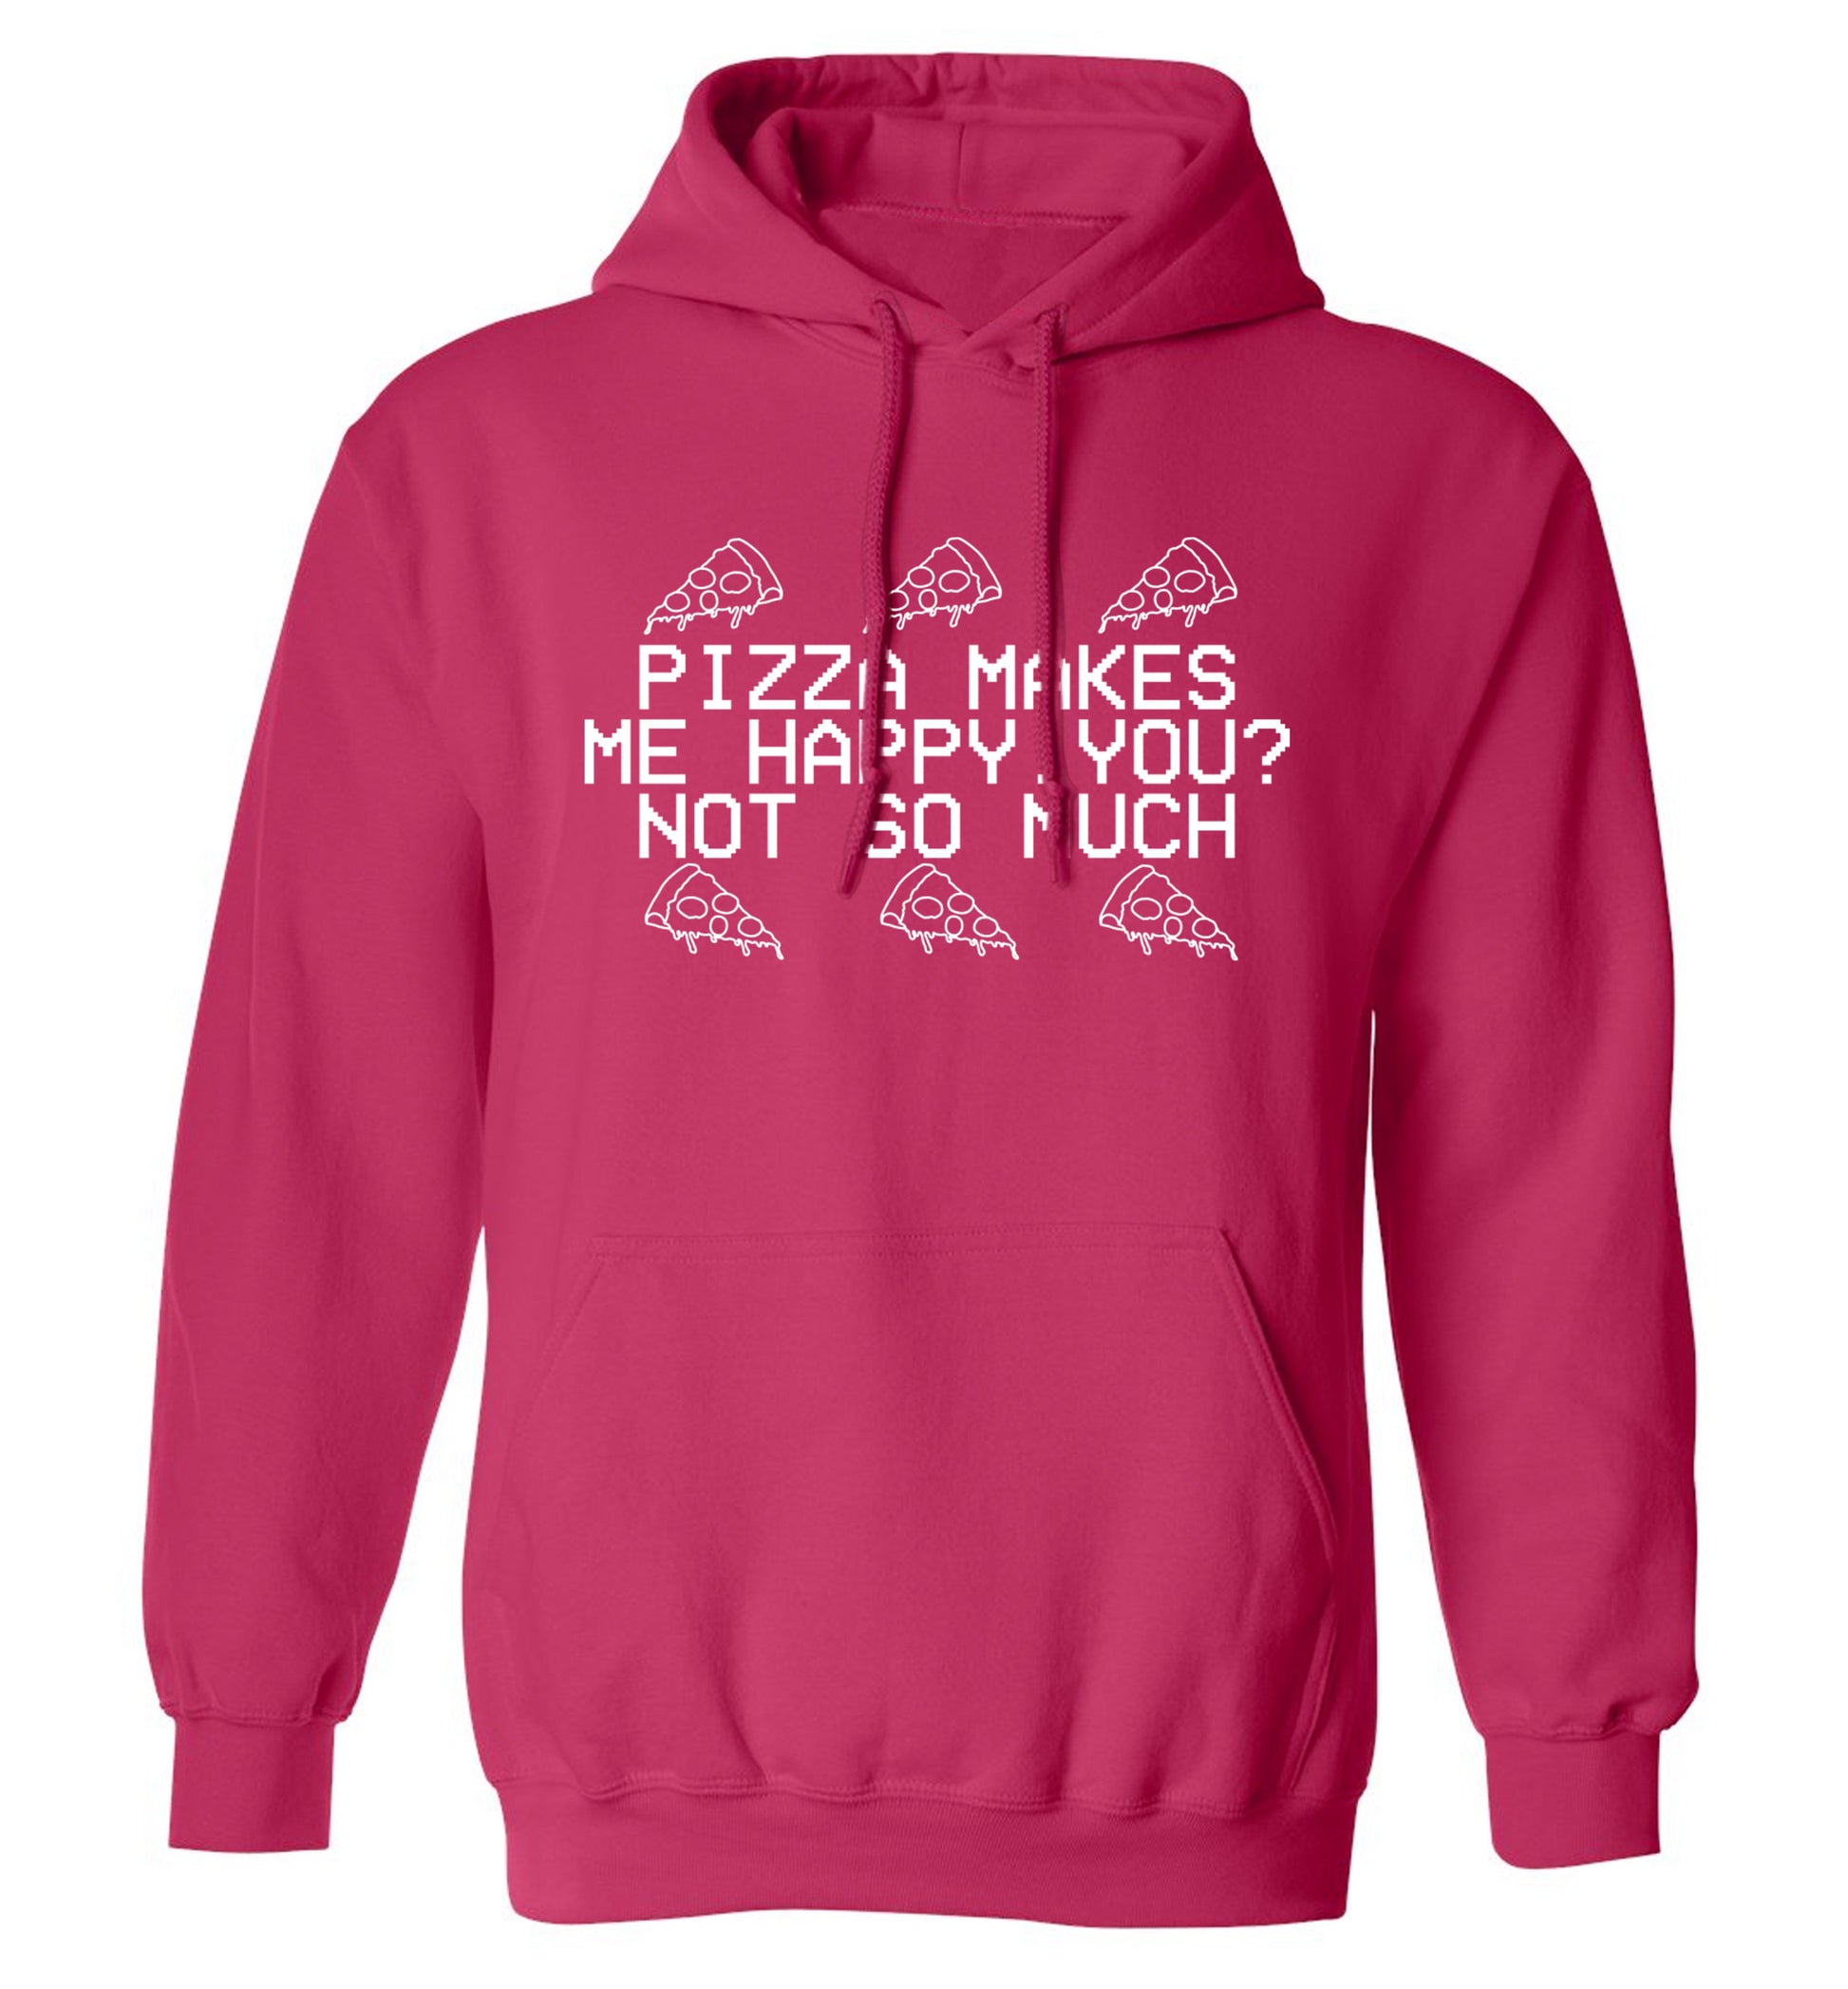 Pizza makes me happy, You? Not so much adults unisex pink hoodie 2XL